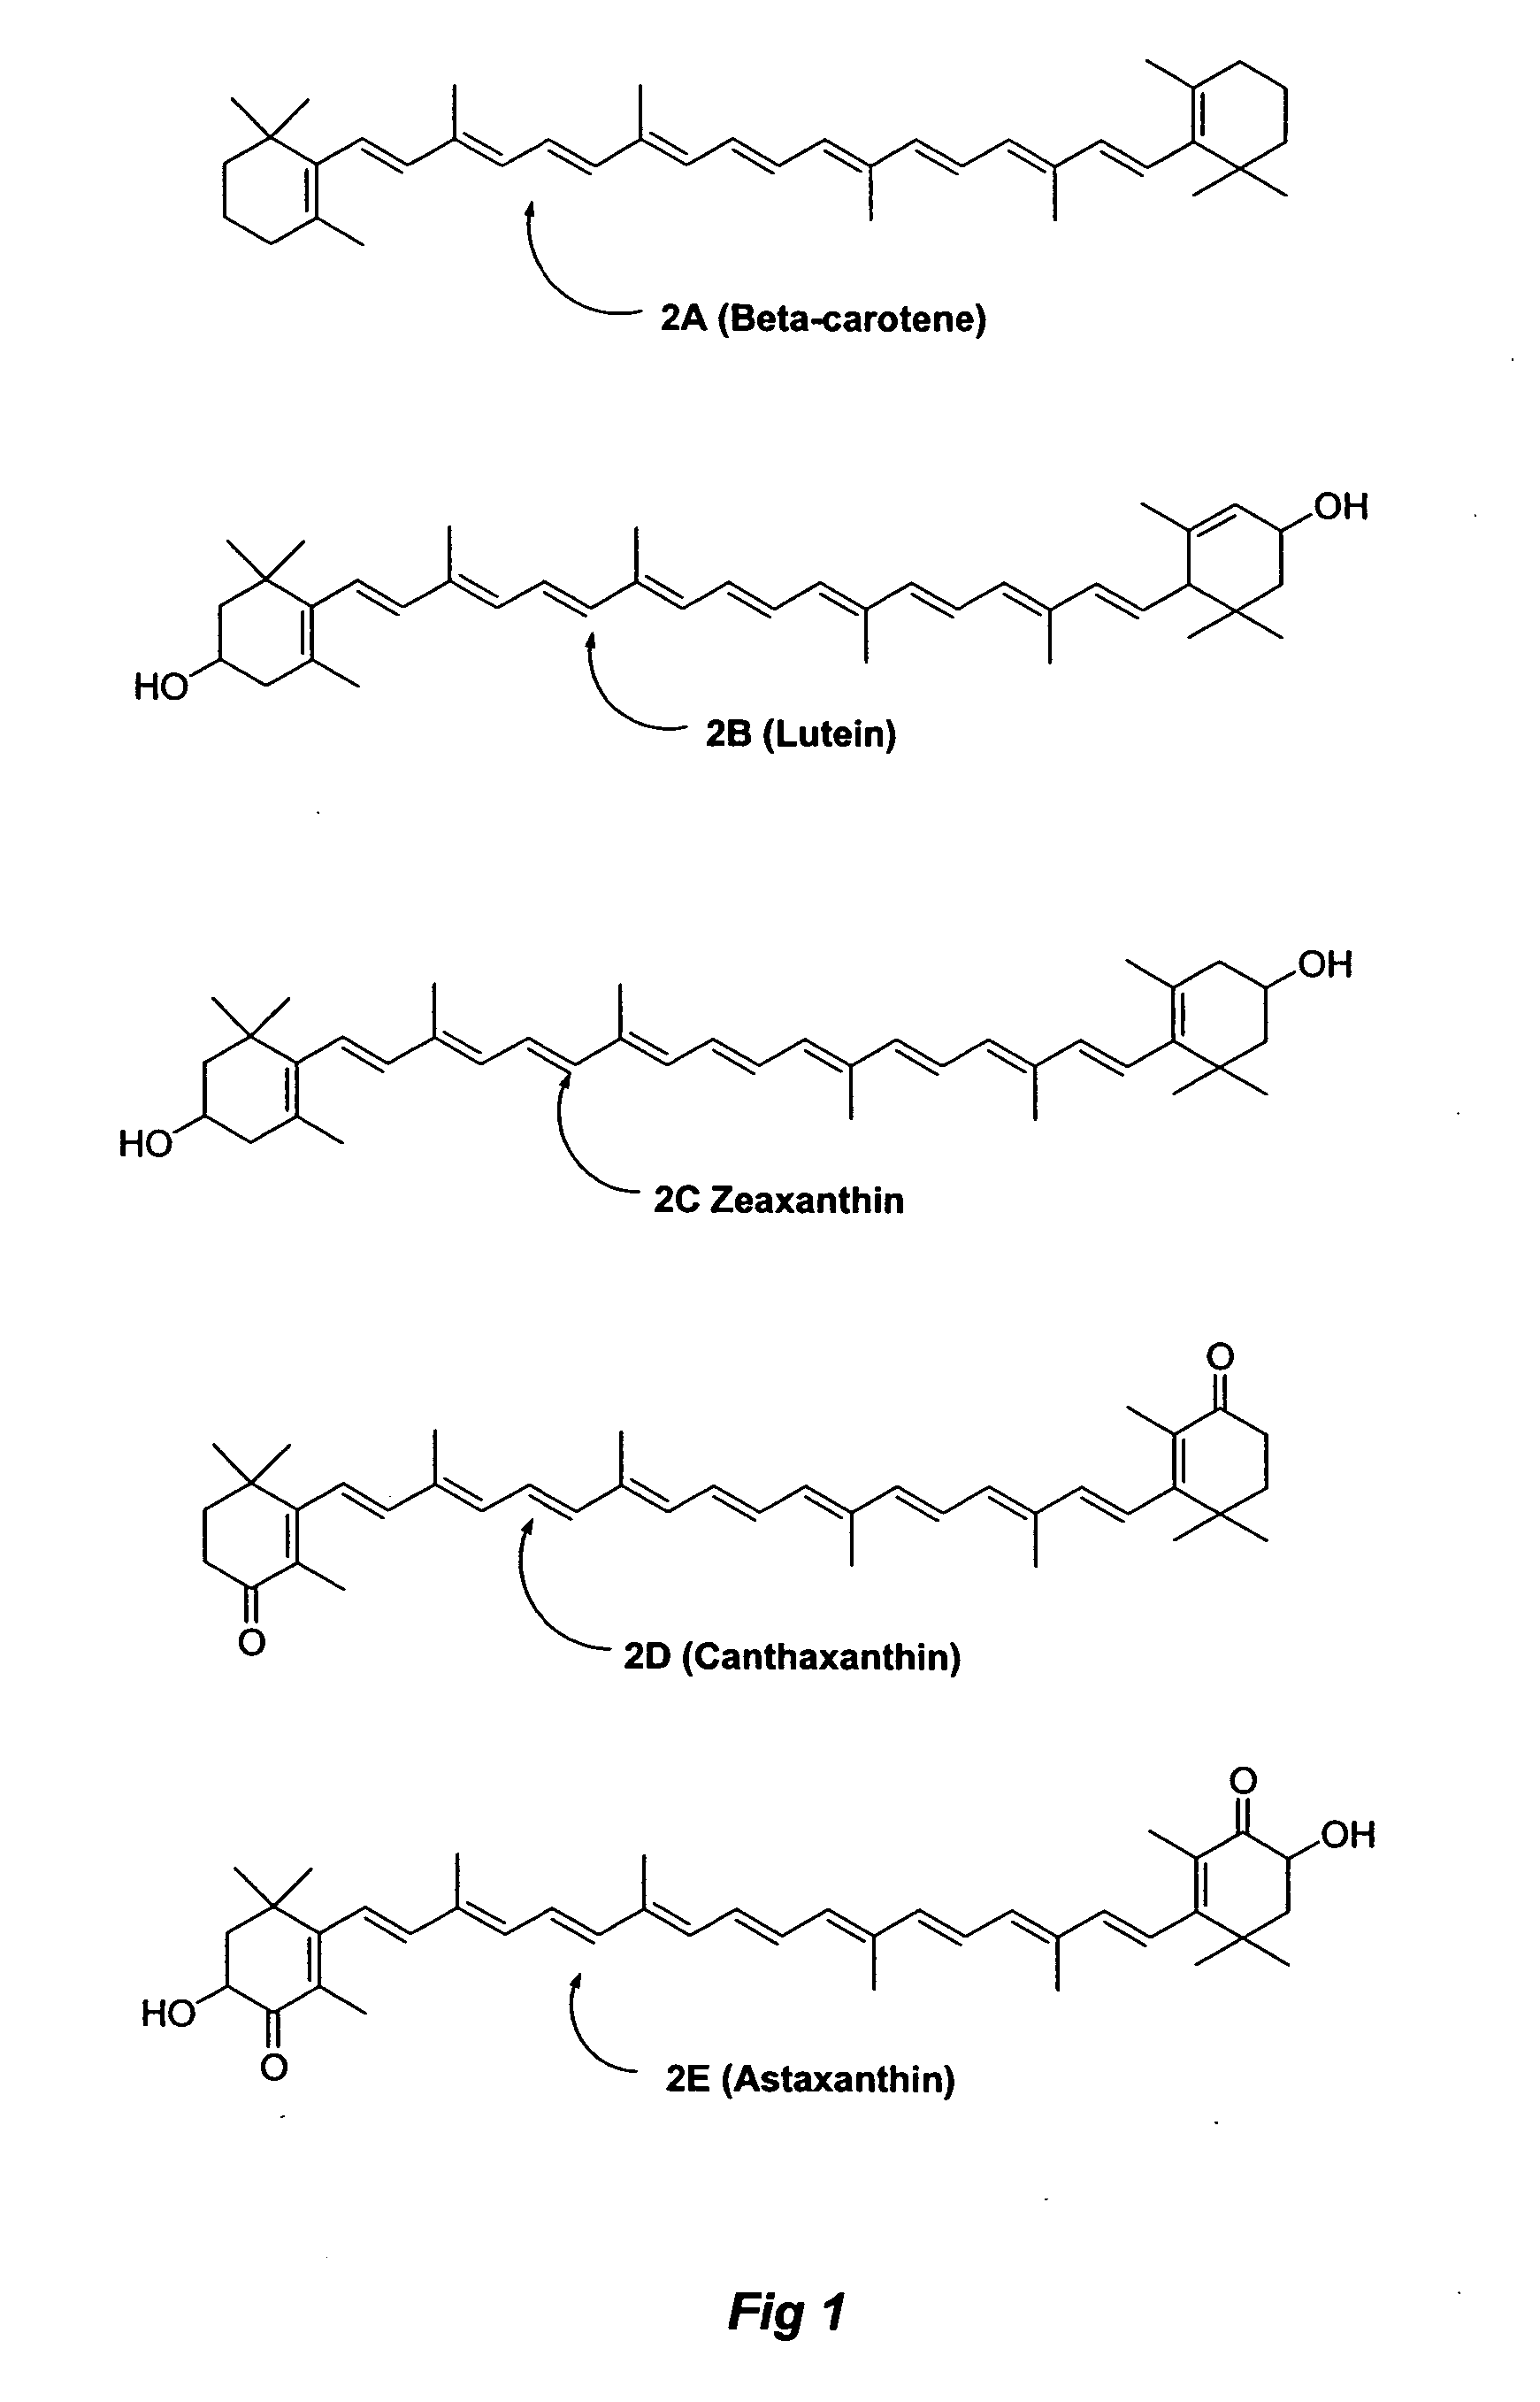 Carotenoid analogs or derivatives for controlling connexin 43 expression